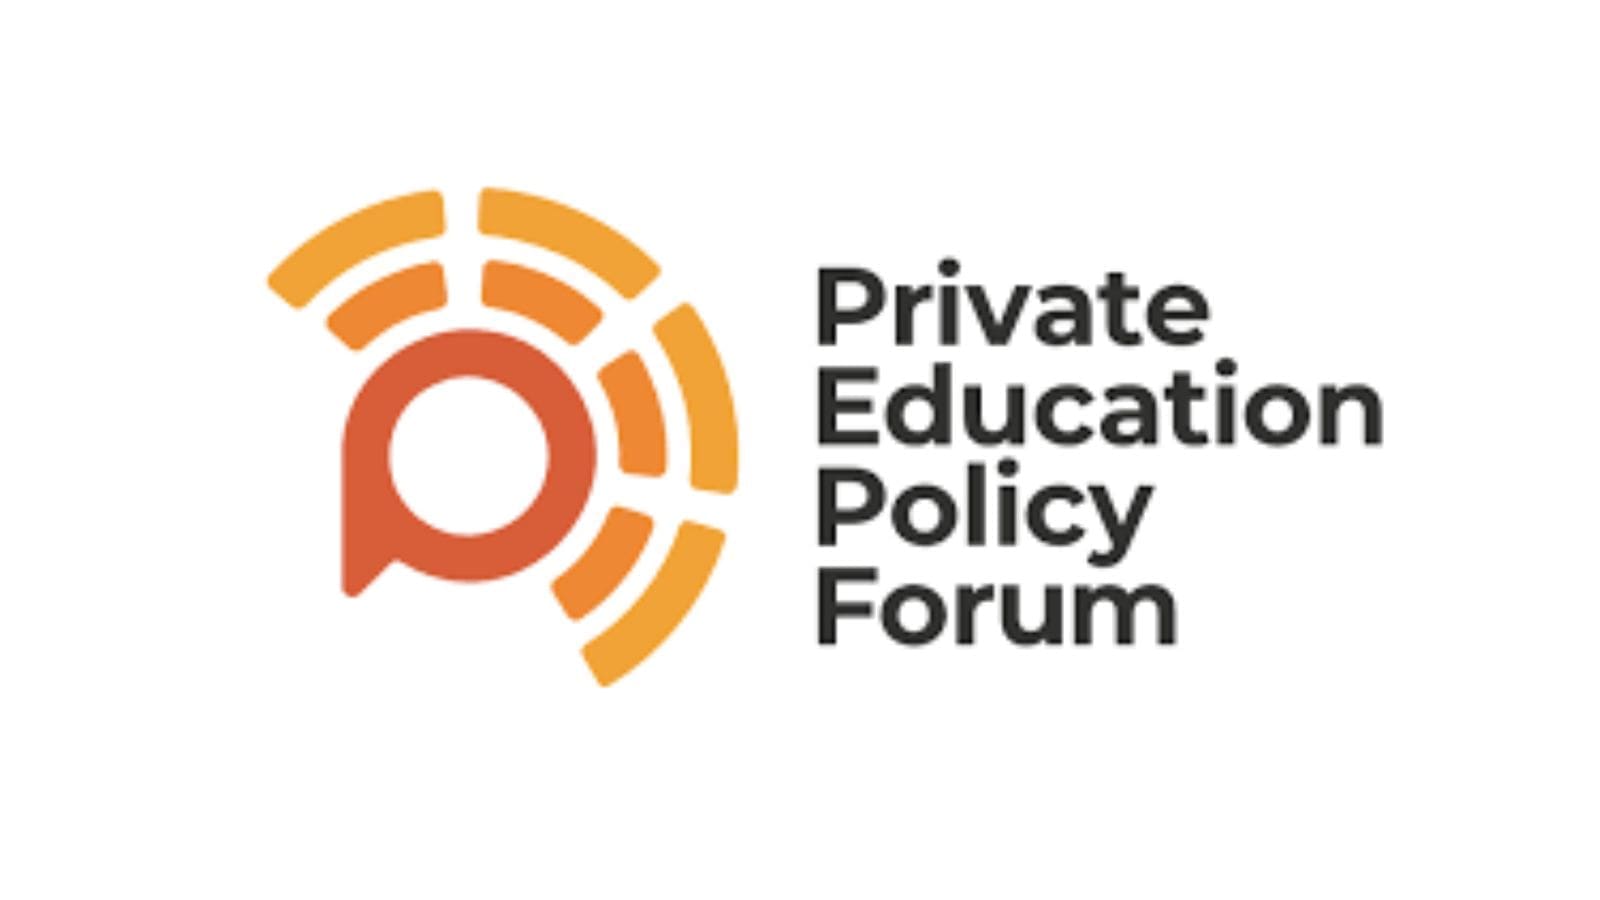 An orange circle with yellow lines around it. Next to this is the words "Private Education Policy Forum".